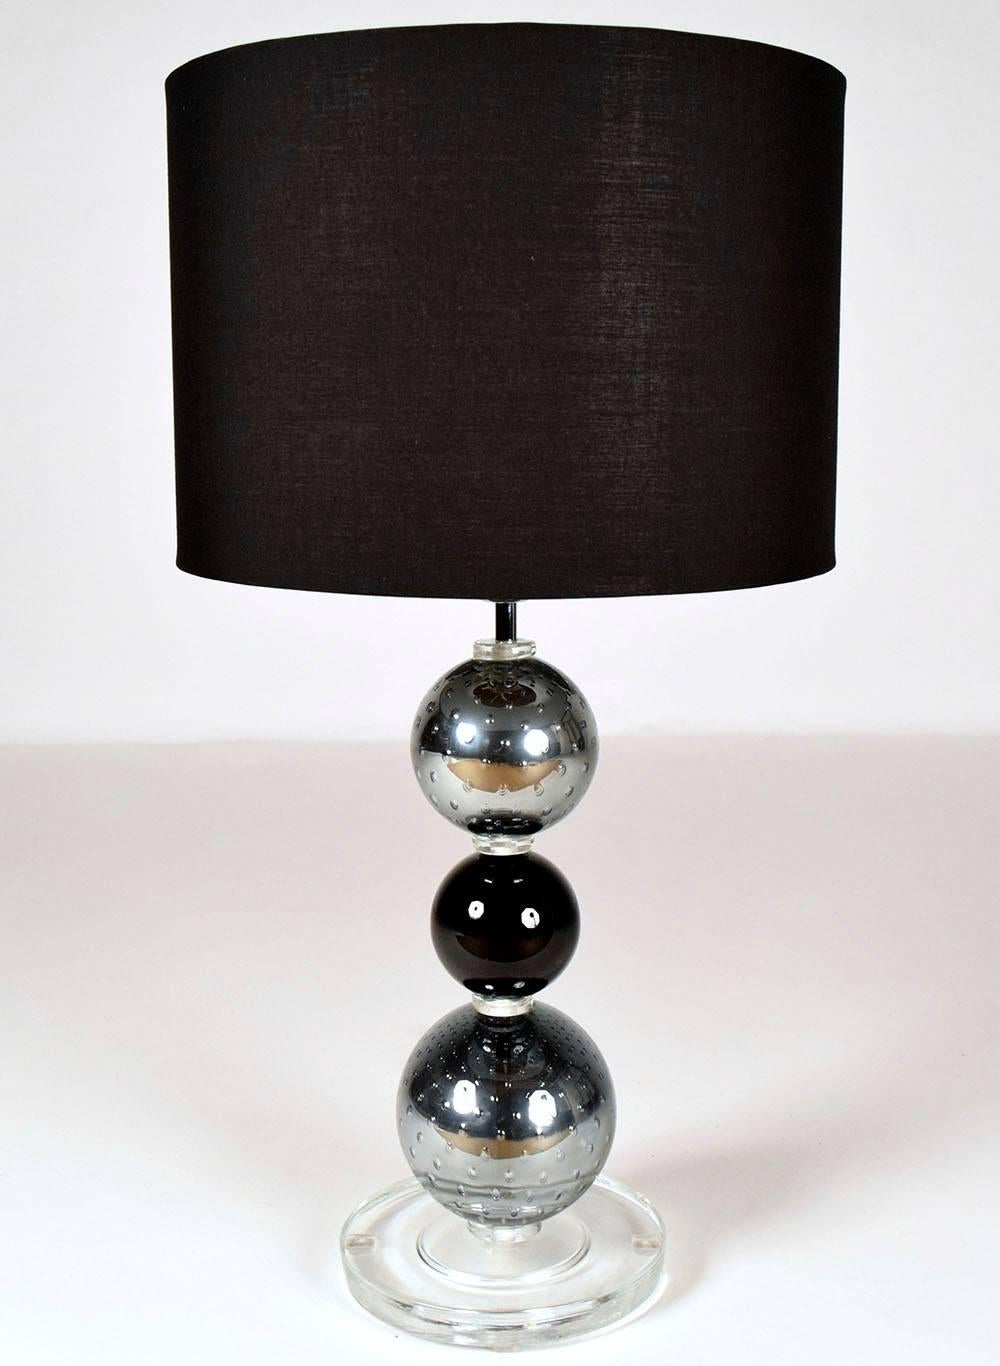 Beautiful pair of contemporary Italian Murano Lamps. Three sphere column with a round clear base. With black shade, newly wired in working condition.
Lamp with no harp and shade: 20